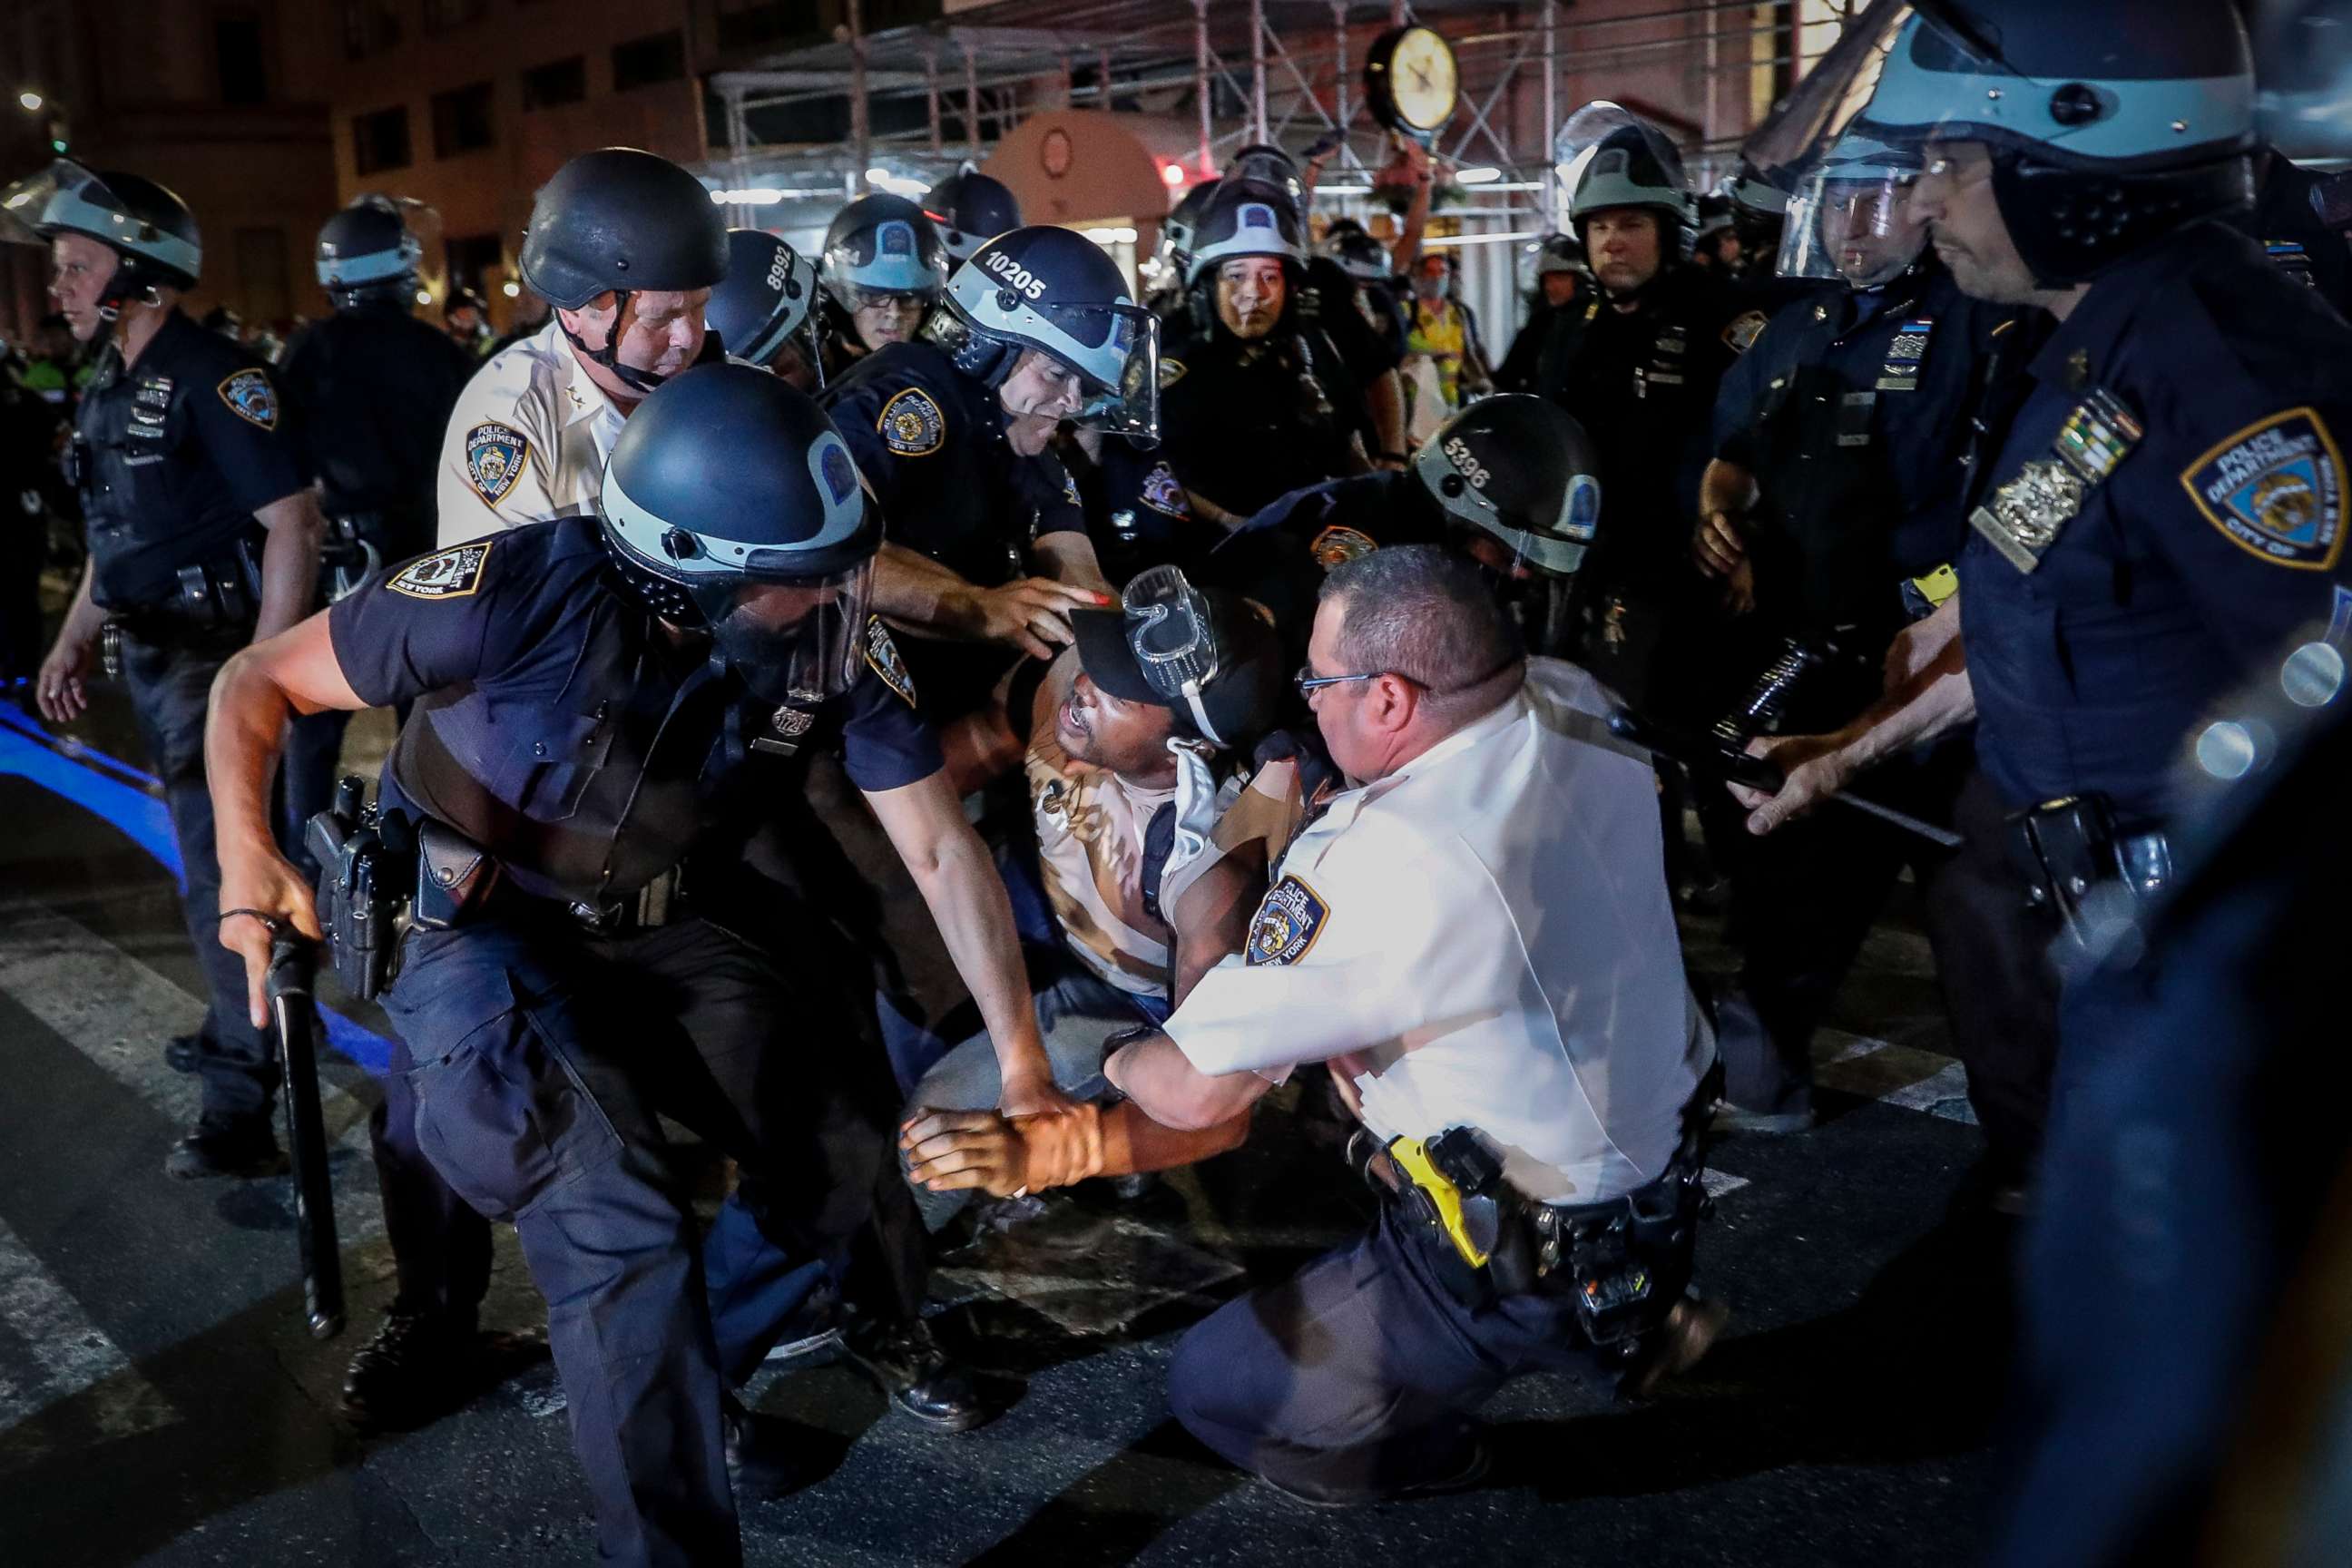 PHOTO: A protester is arrested on Fifth Avenue by NYPD officers during a march, Thursday, June 4, 2020, in the Manhattan borough of New York.